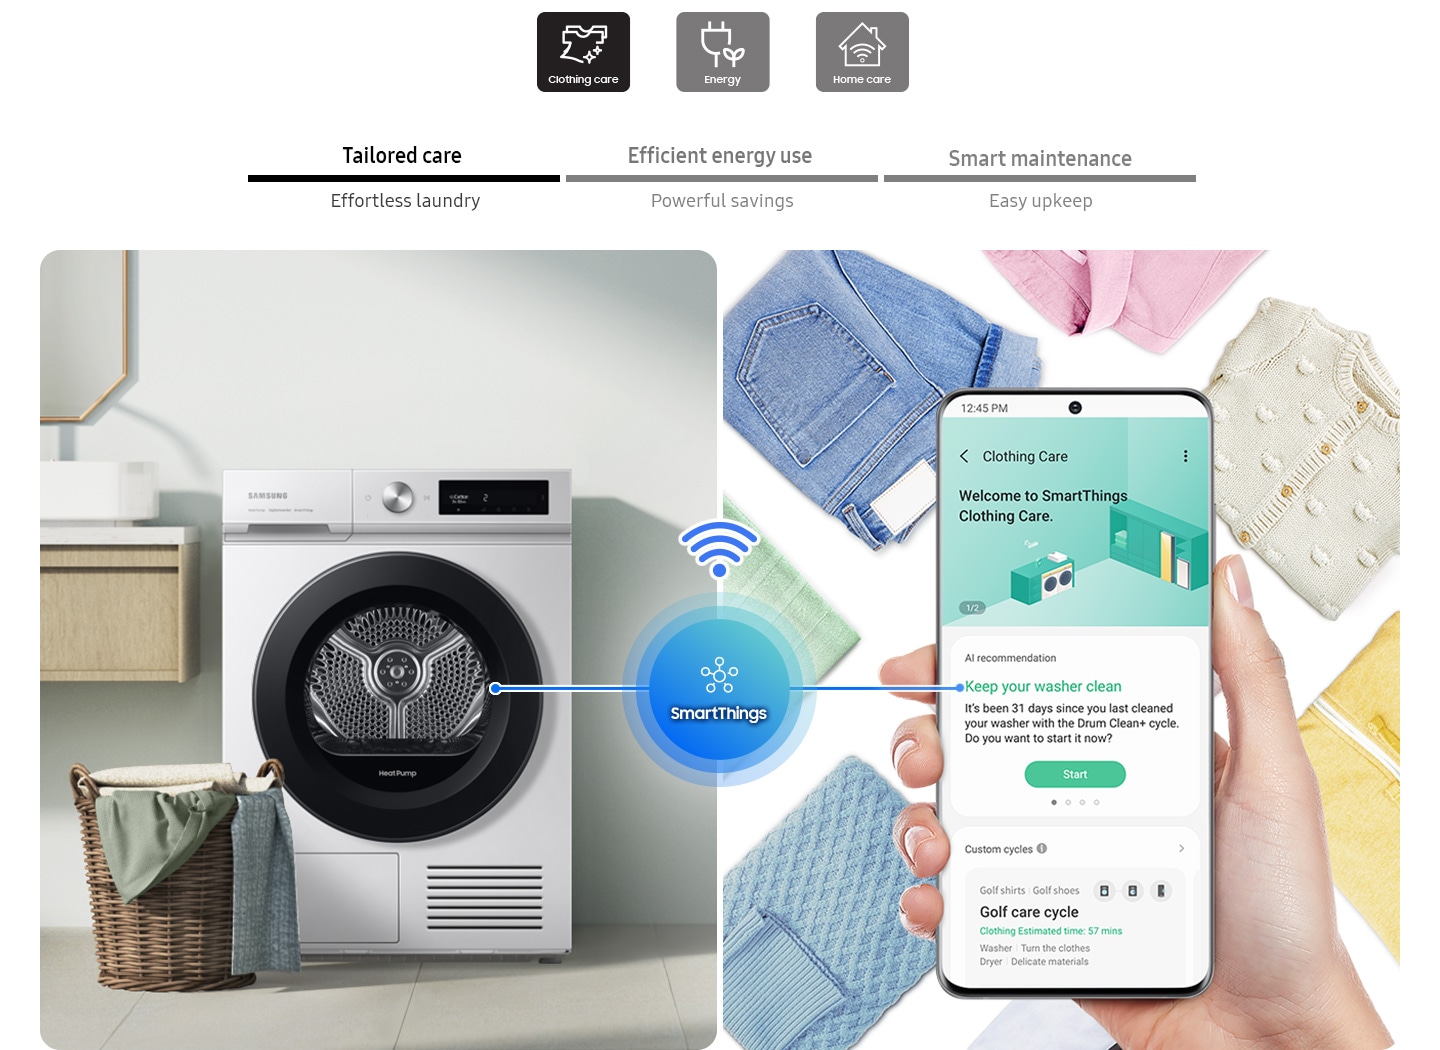 The SmartThings app helps Tailored care, Efficient energy use, Smart maintenance.  Clothing Care displays AI recommendations for effortless laundry, Energy notifies best rates based on personal usage for powerful saving, Home Care help easy upkeep the drying machine maintenance.